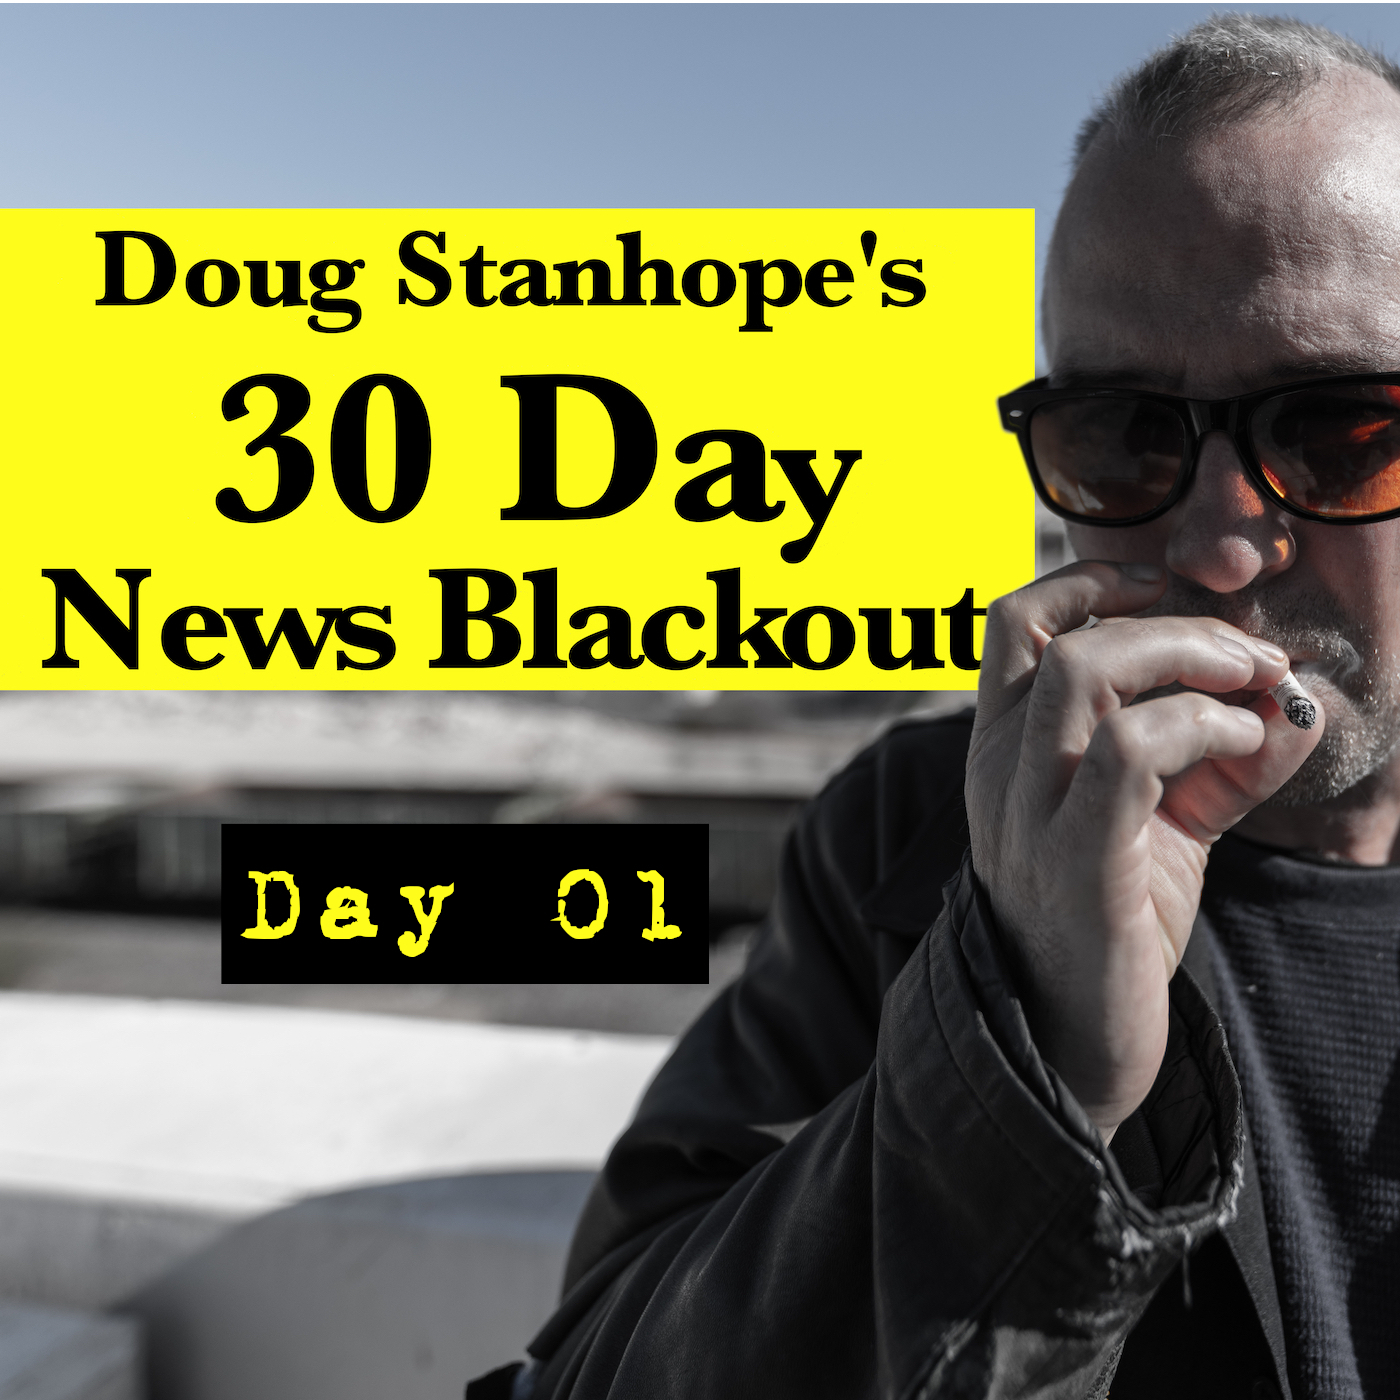 Ep.#364: Day 01 - Stanhope’s 30 Day News Blackout